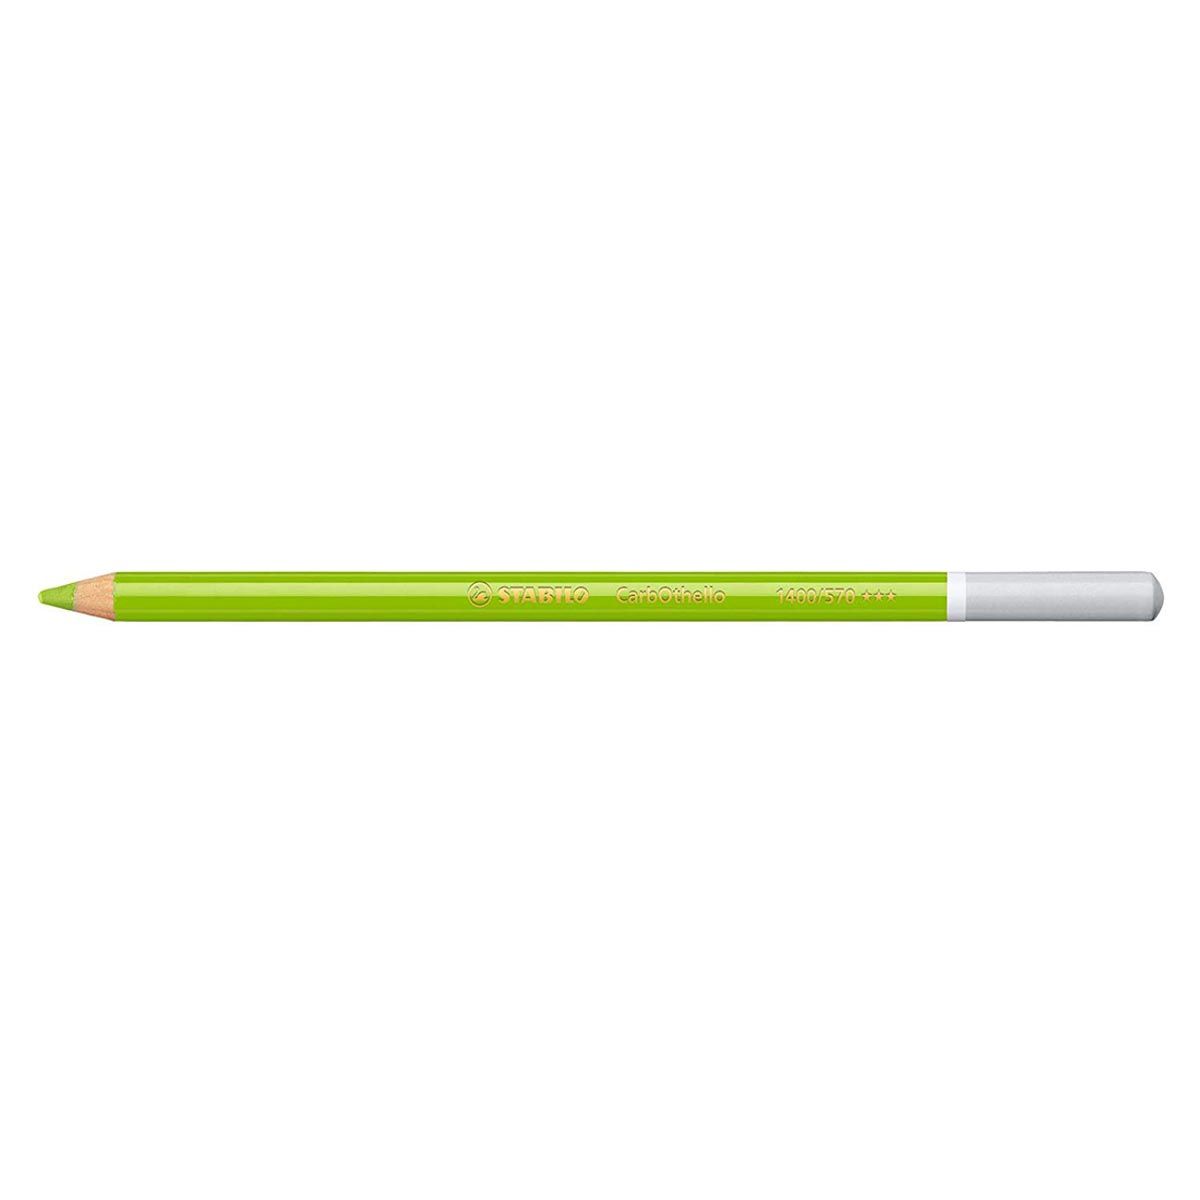 Stabilo Carbothello Pastel Pencil Leaf Green Middle 570